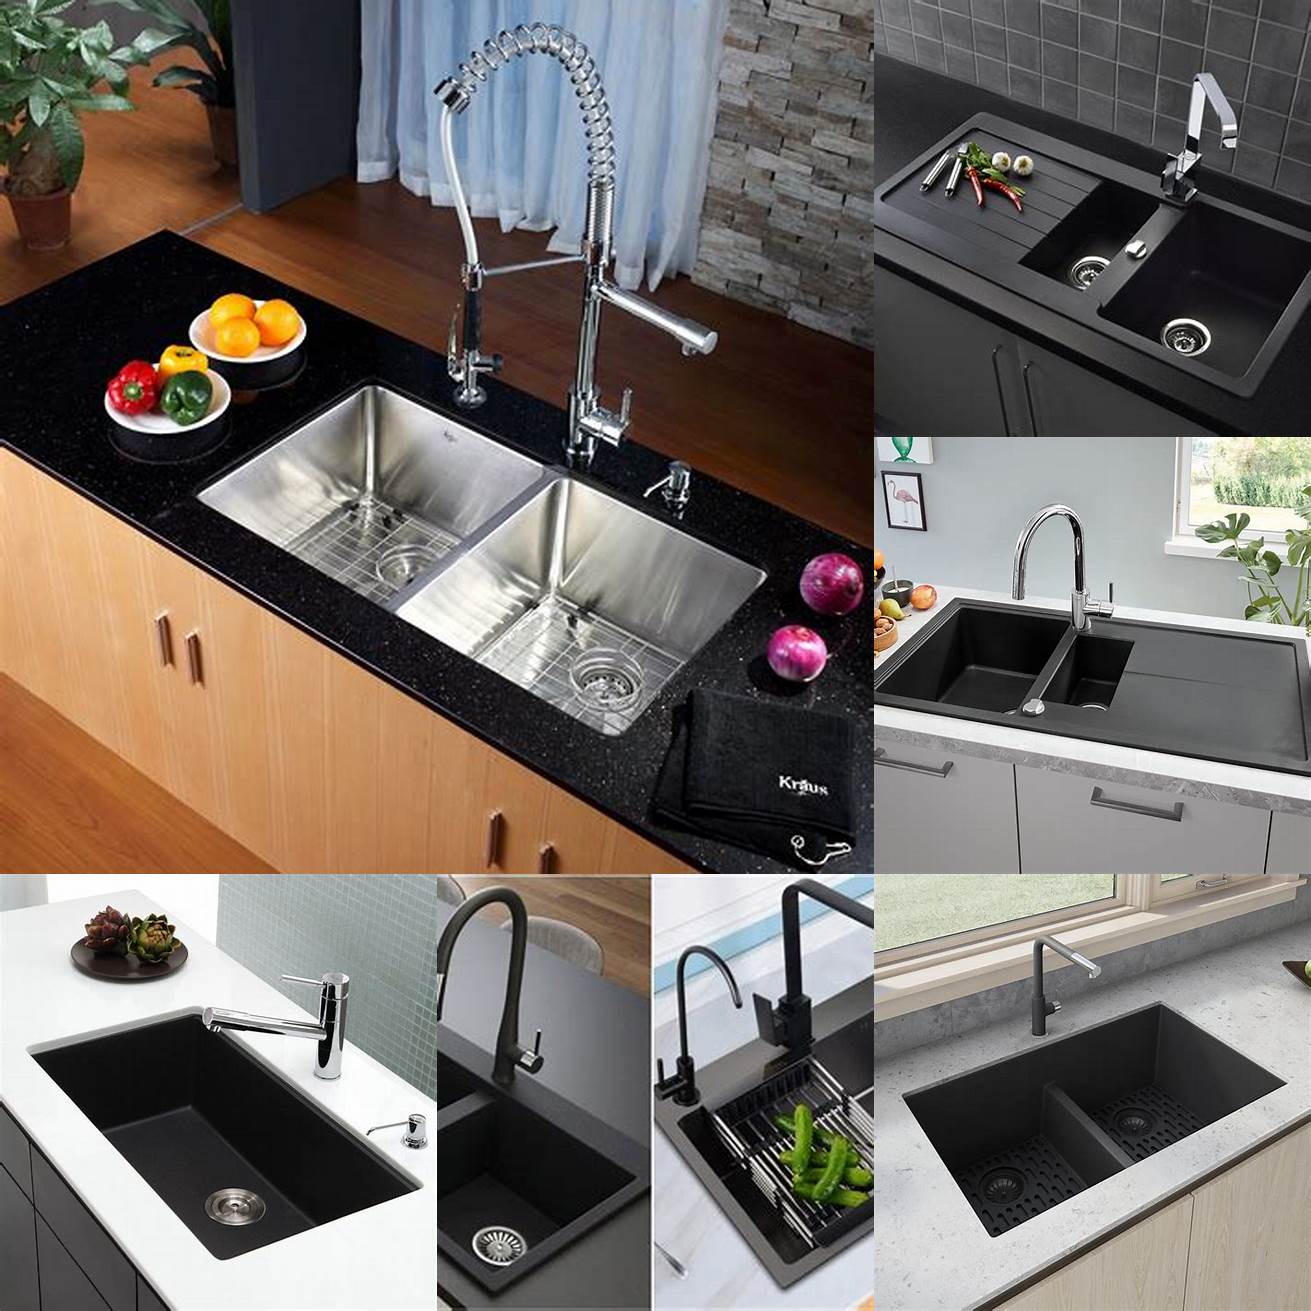 Image of a composite kitchen sink with a modern kitchen design